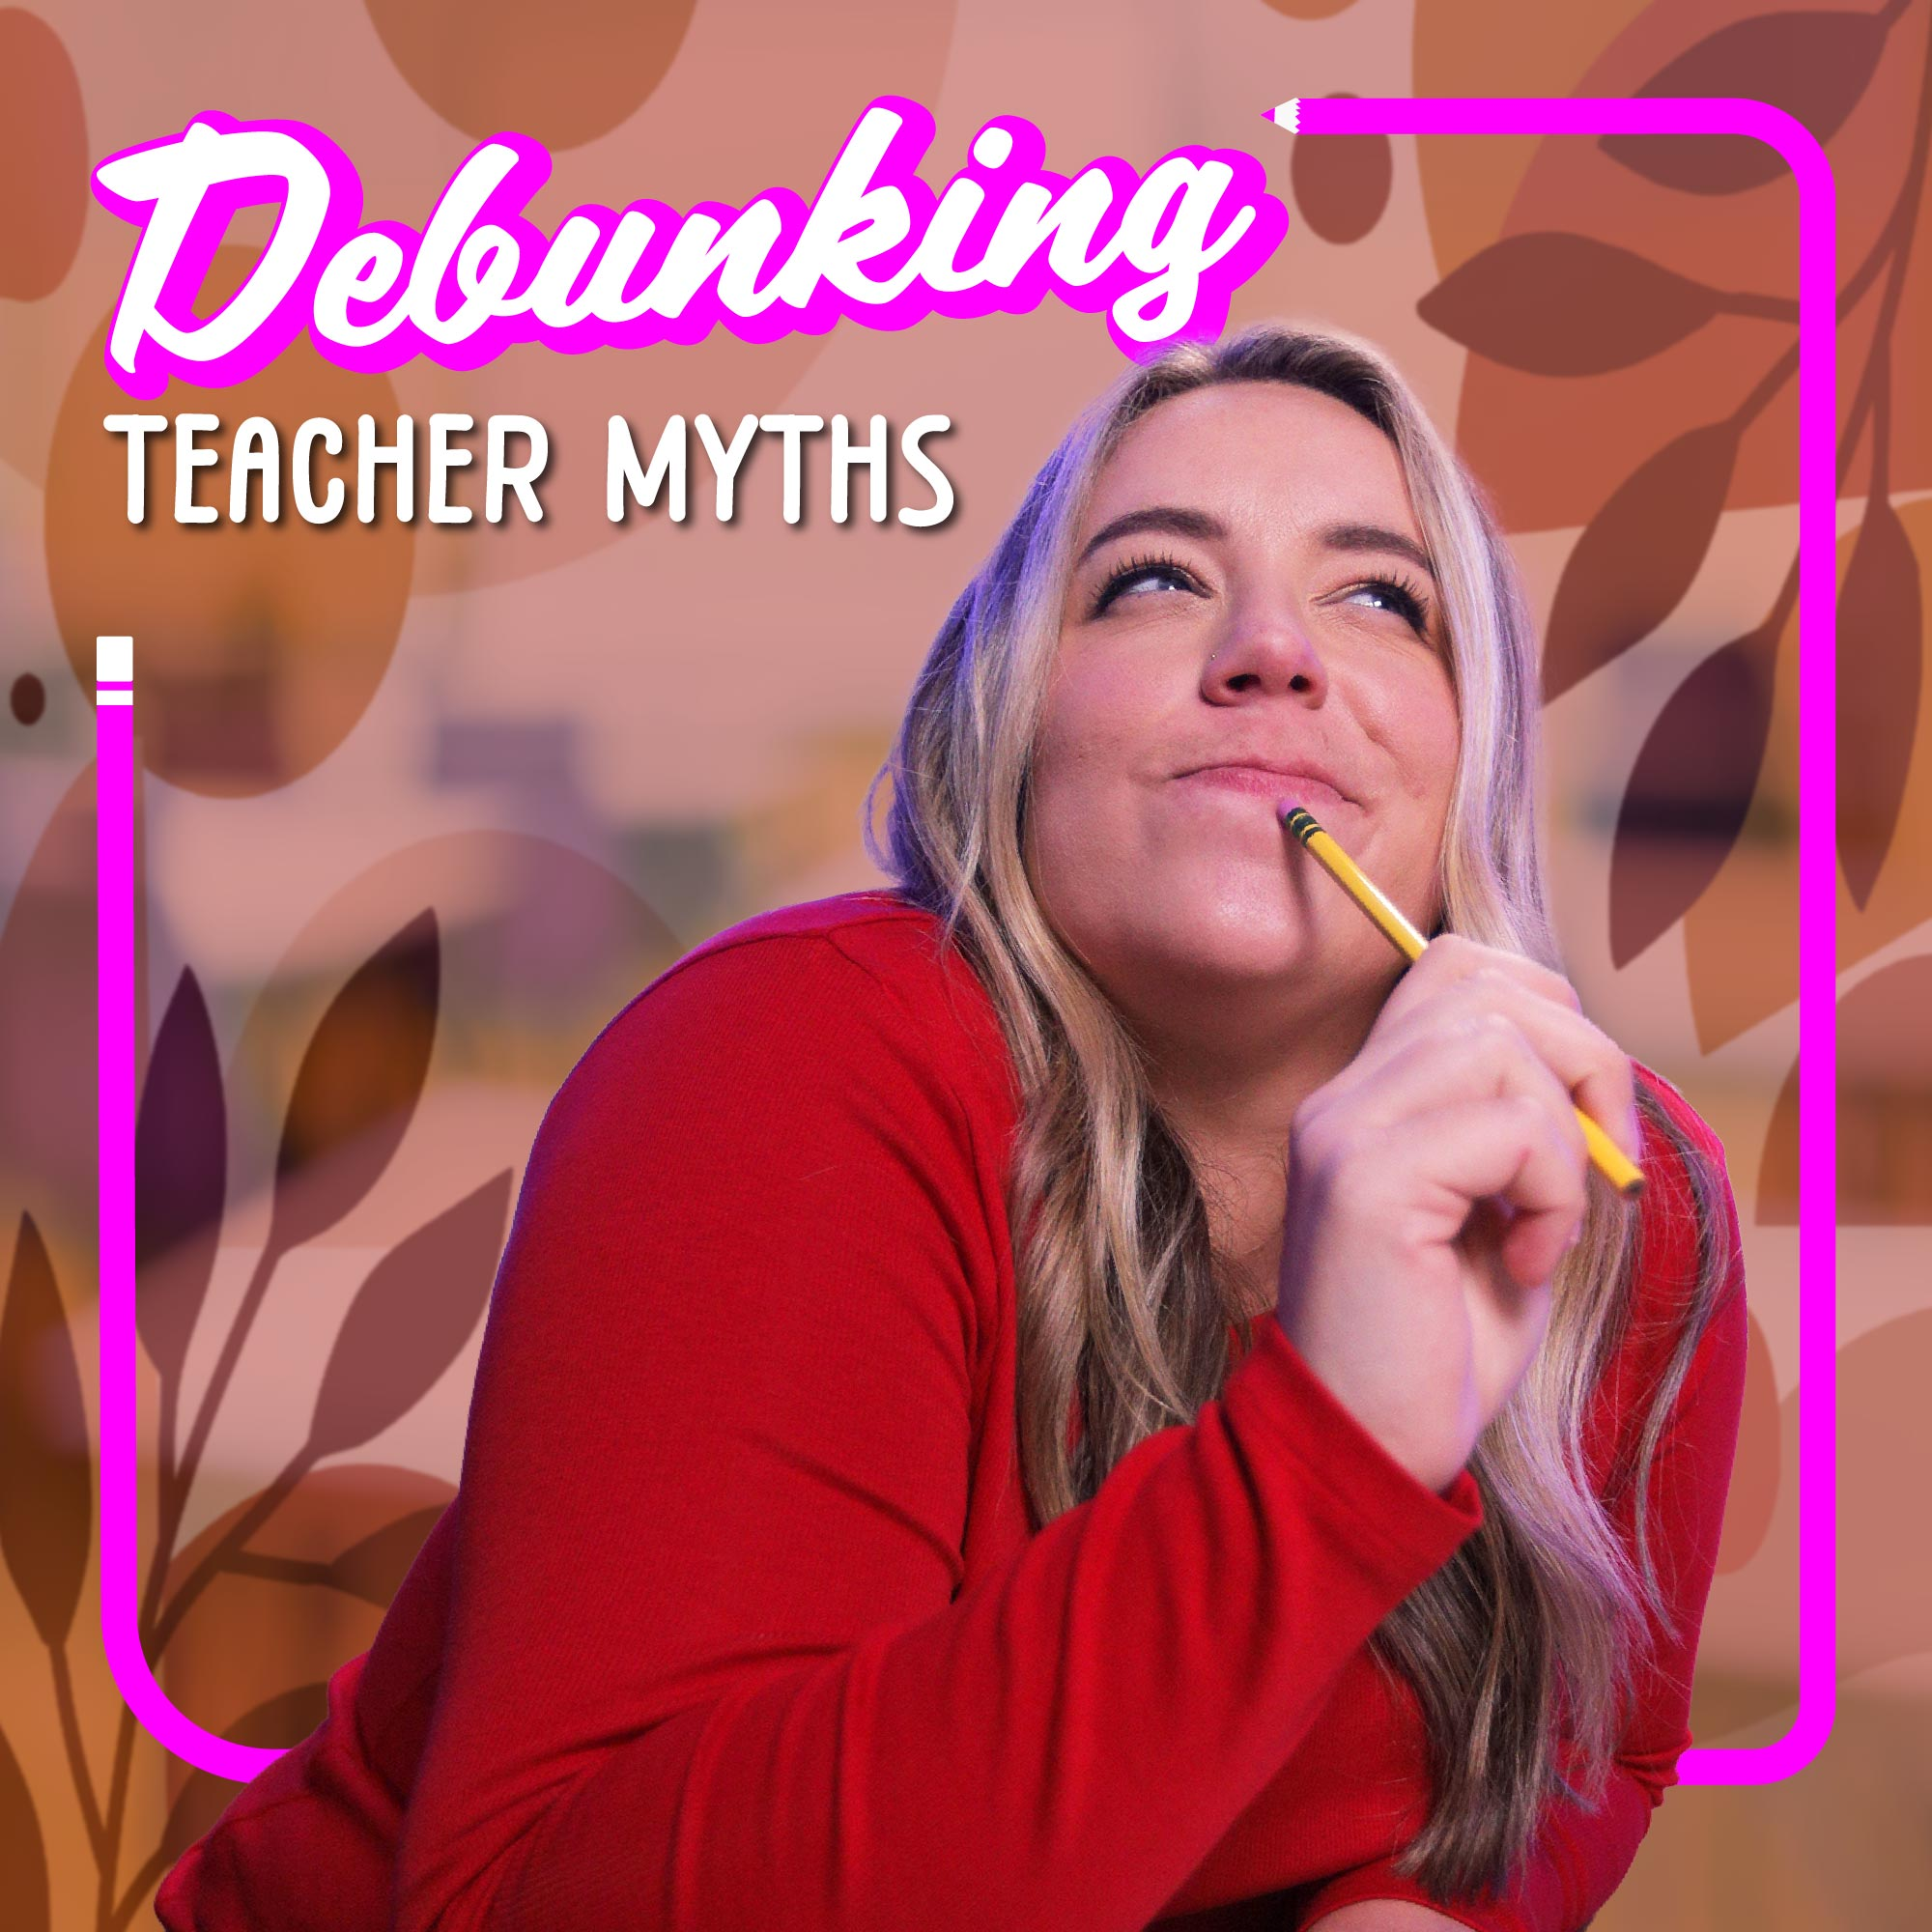 Debunking teaching myths, with latte in hand 🍎🤣